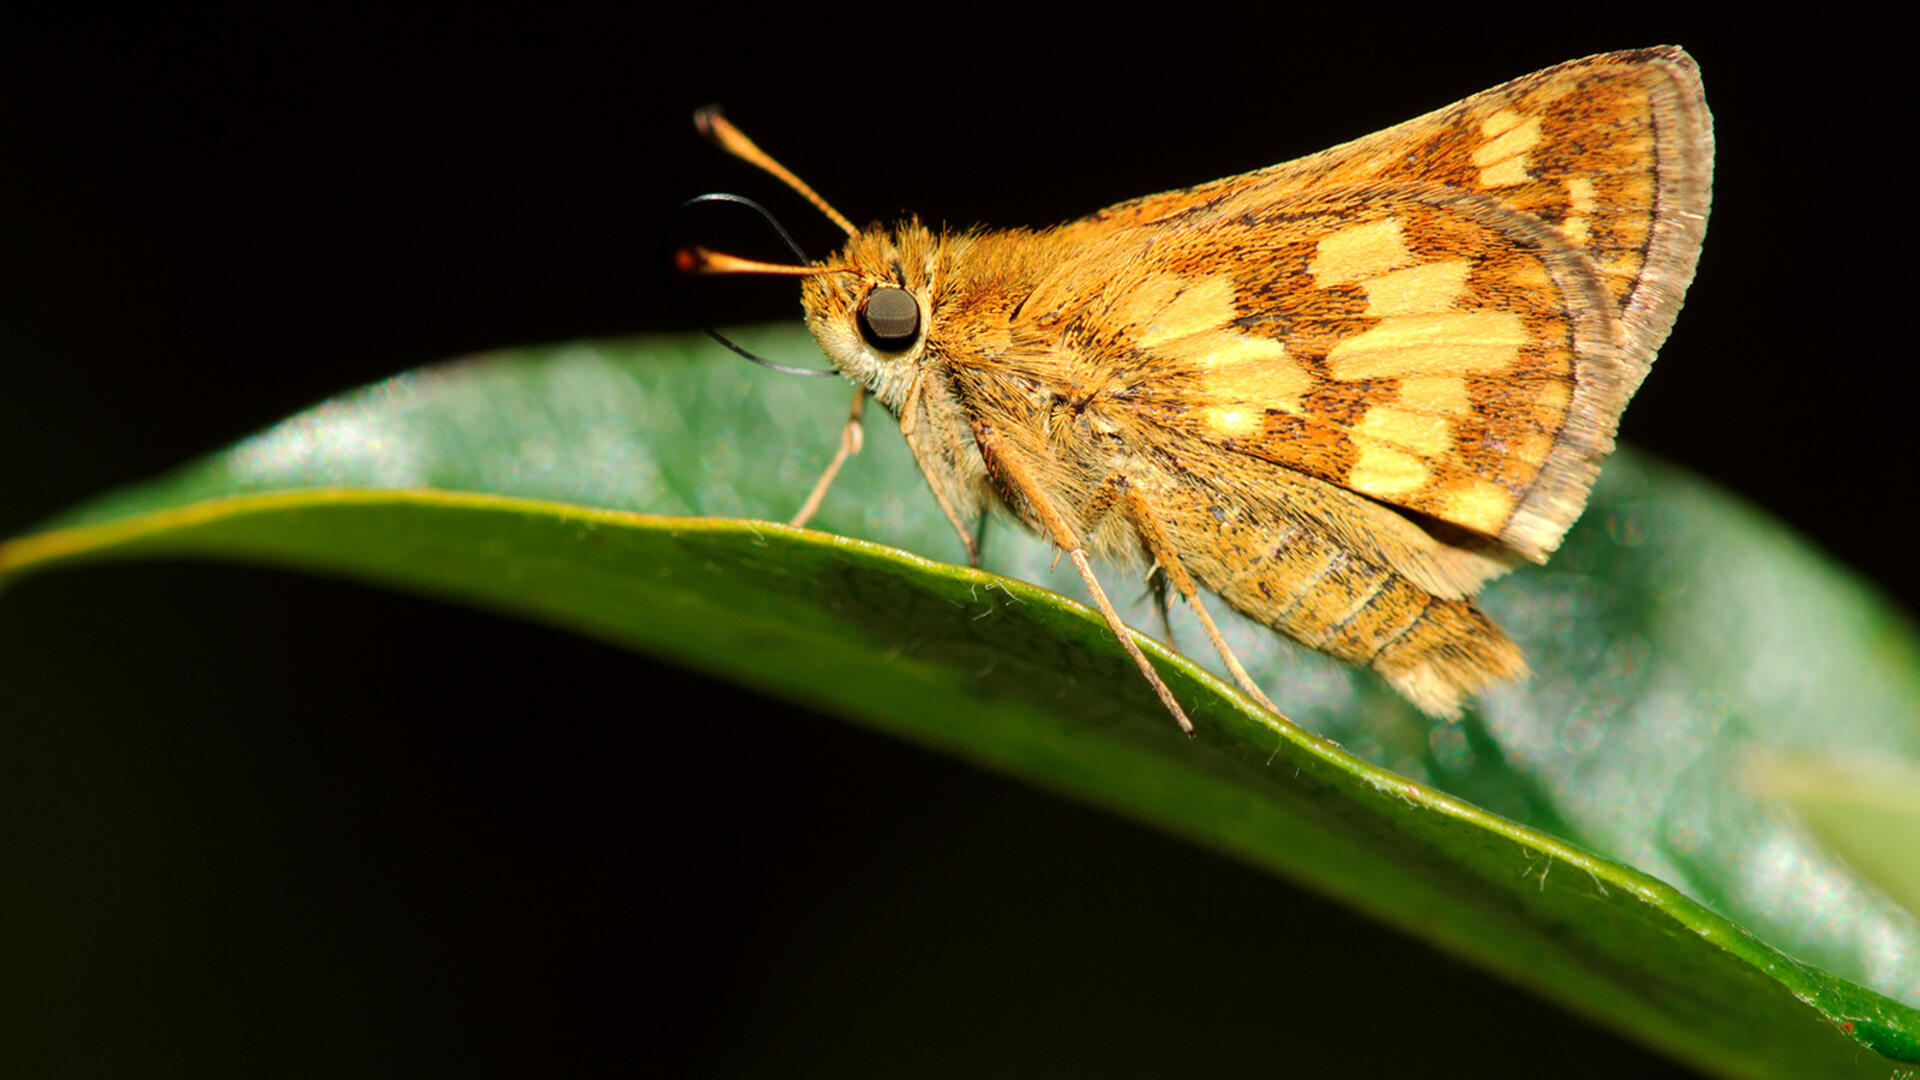 A bright yellow-orange moth stands on a leaf.